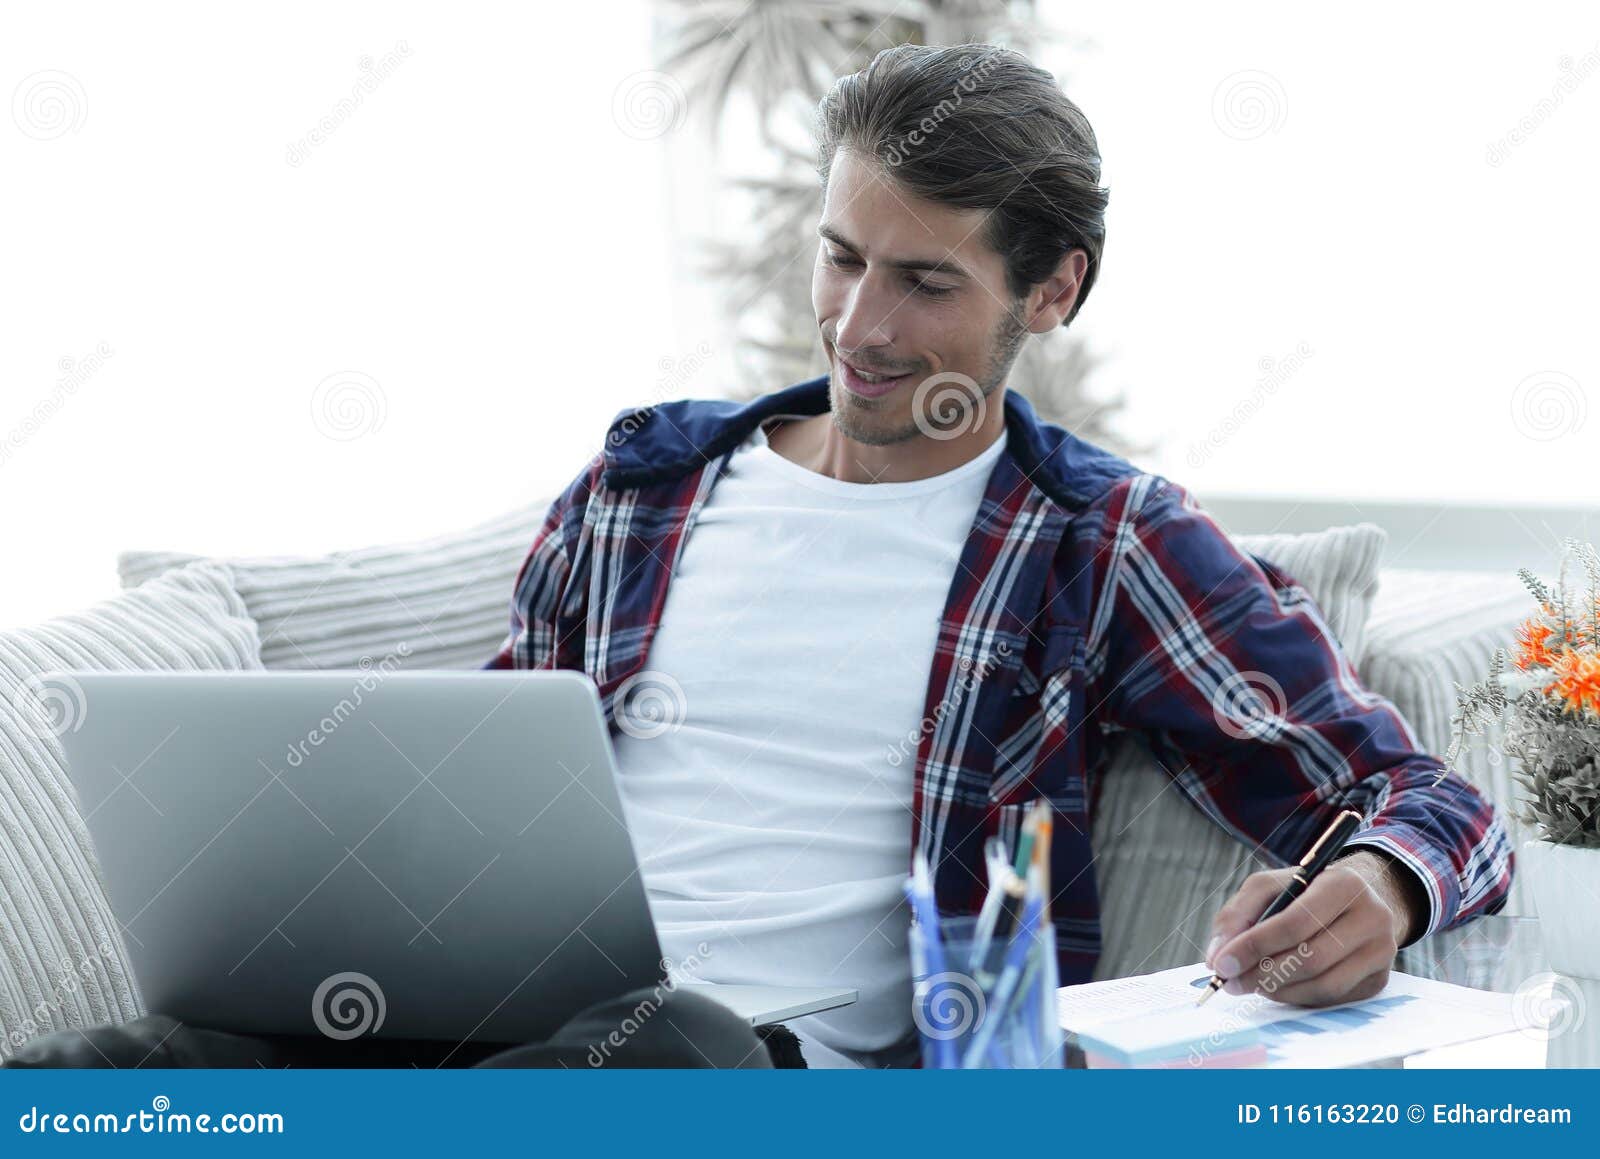 confident guy working with laptop at home.